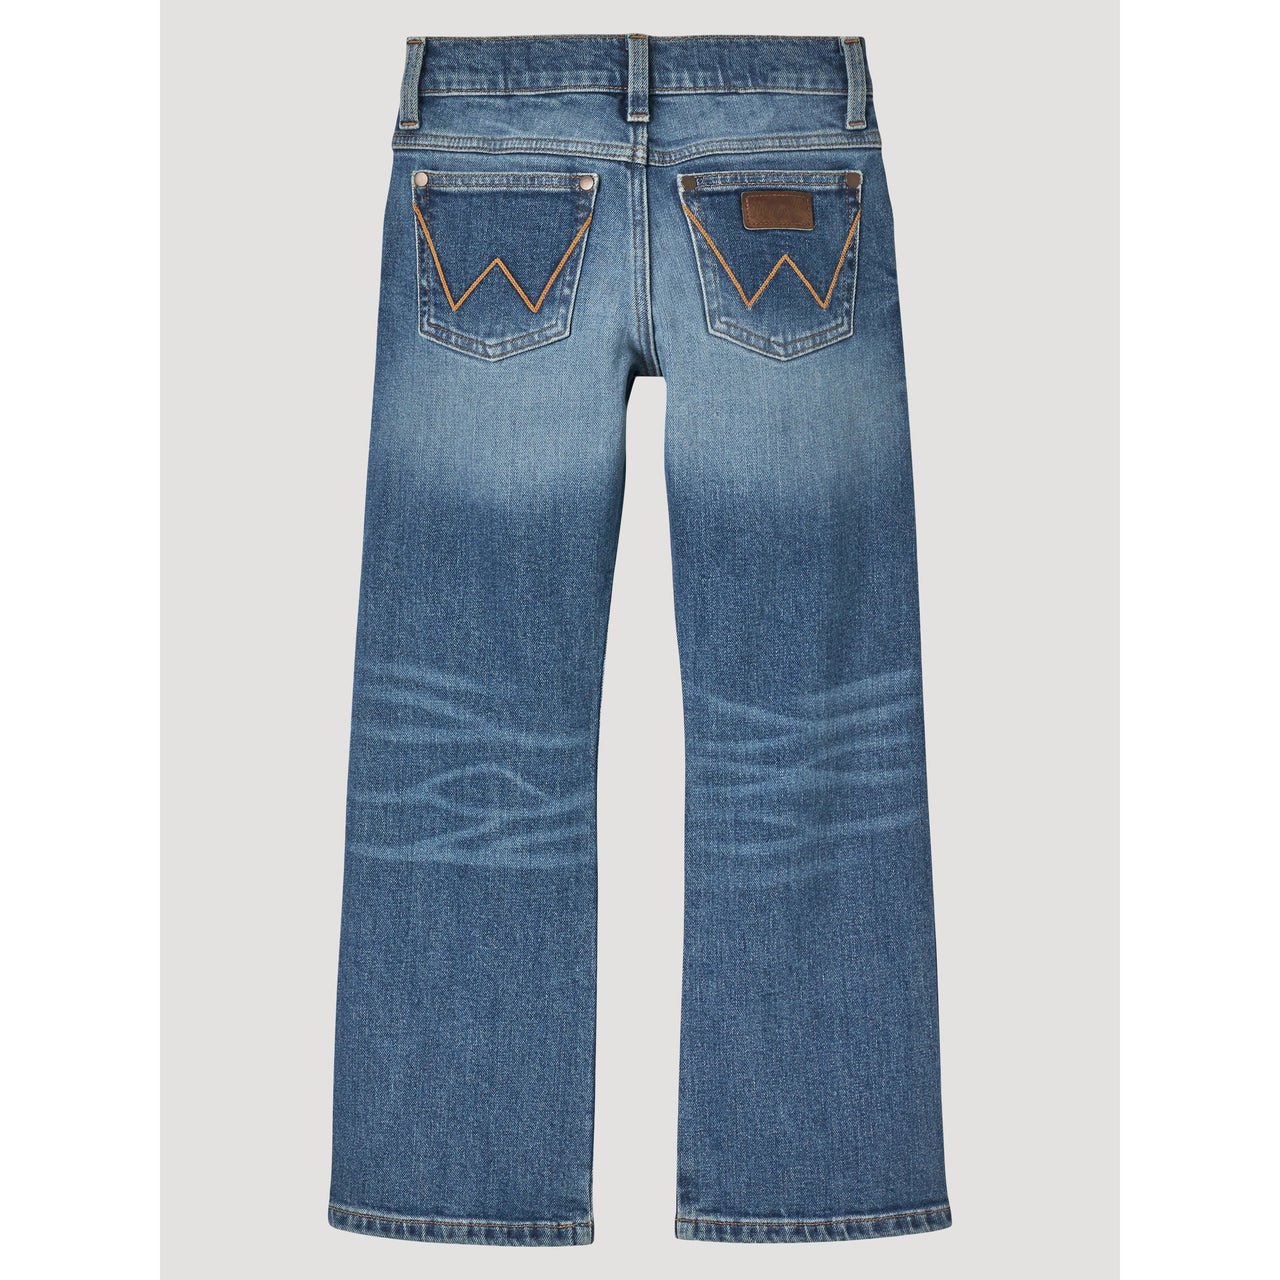 Wrangler Boy's Youth Retro Relaxed Bootcut Jeans - Andalusian